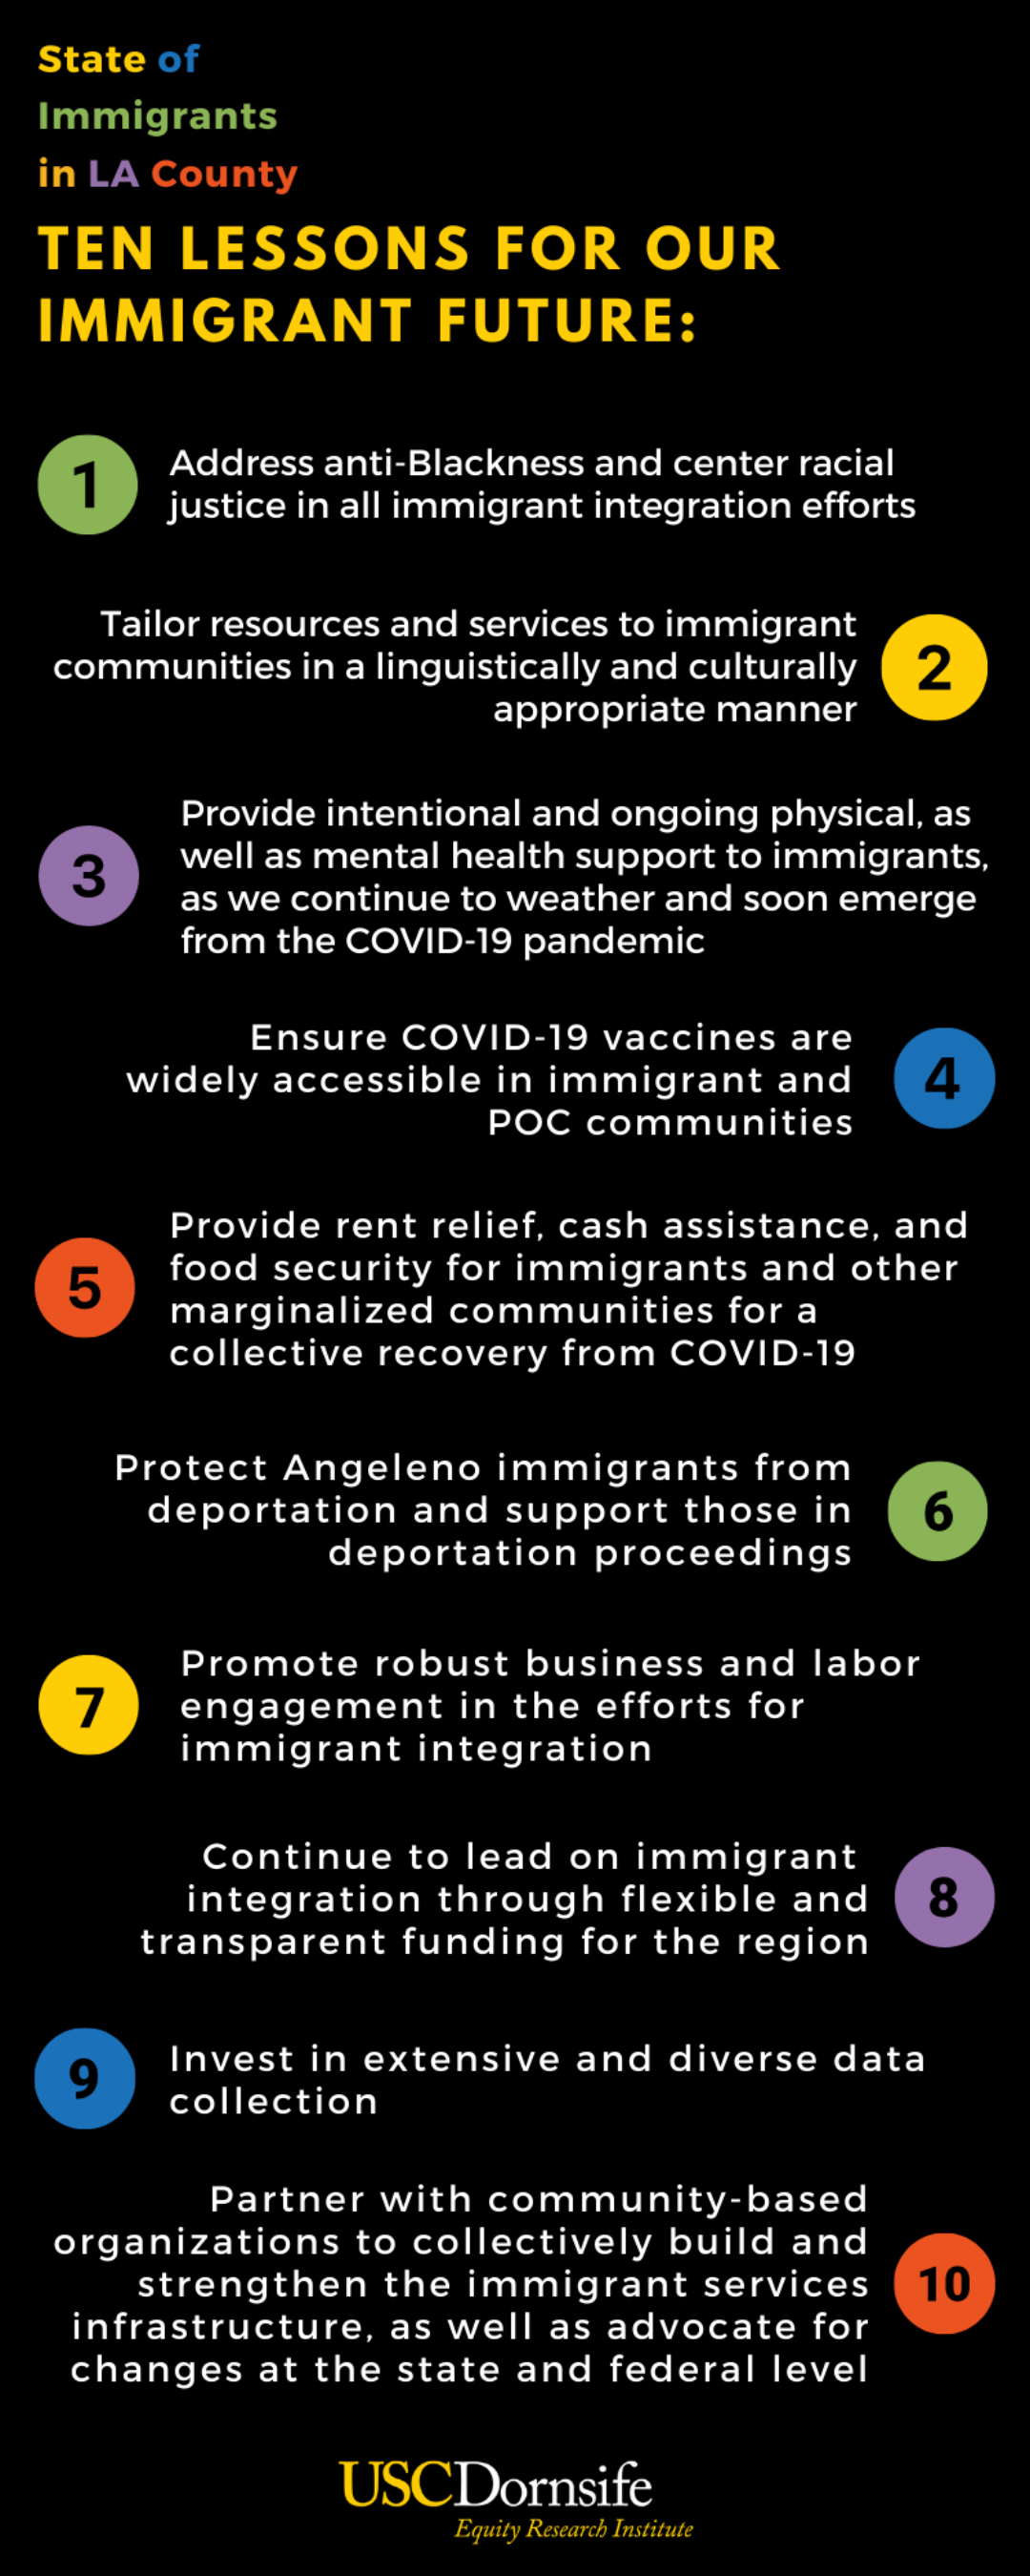 infographic detailing lessons for our immigrant future on addressing anti-Blackness, tailoring resources and services linguistically and appropriately, providing intentional support, ensuring COVID-19 treatments and vaccines are widely accessibly, providing rent relief, cash assistance, and food security, protecting immigrants from deportation and supporting those in proceedings, promoting business and labor engagement, leading on immigrant inclusion with flexible and transparent funding, investing in data collection, and partnering with community-based organizations for strengthen immigrant services infrastructure